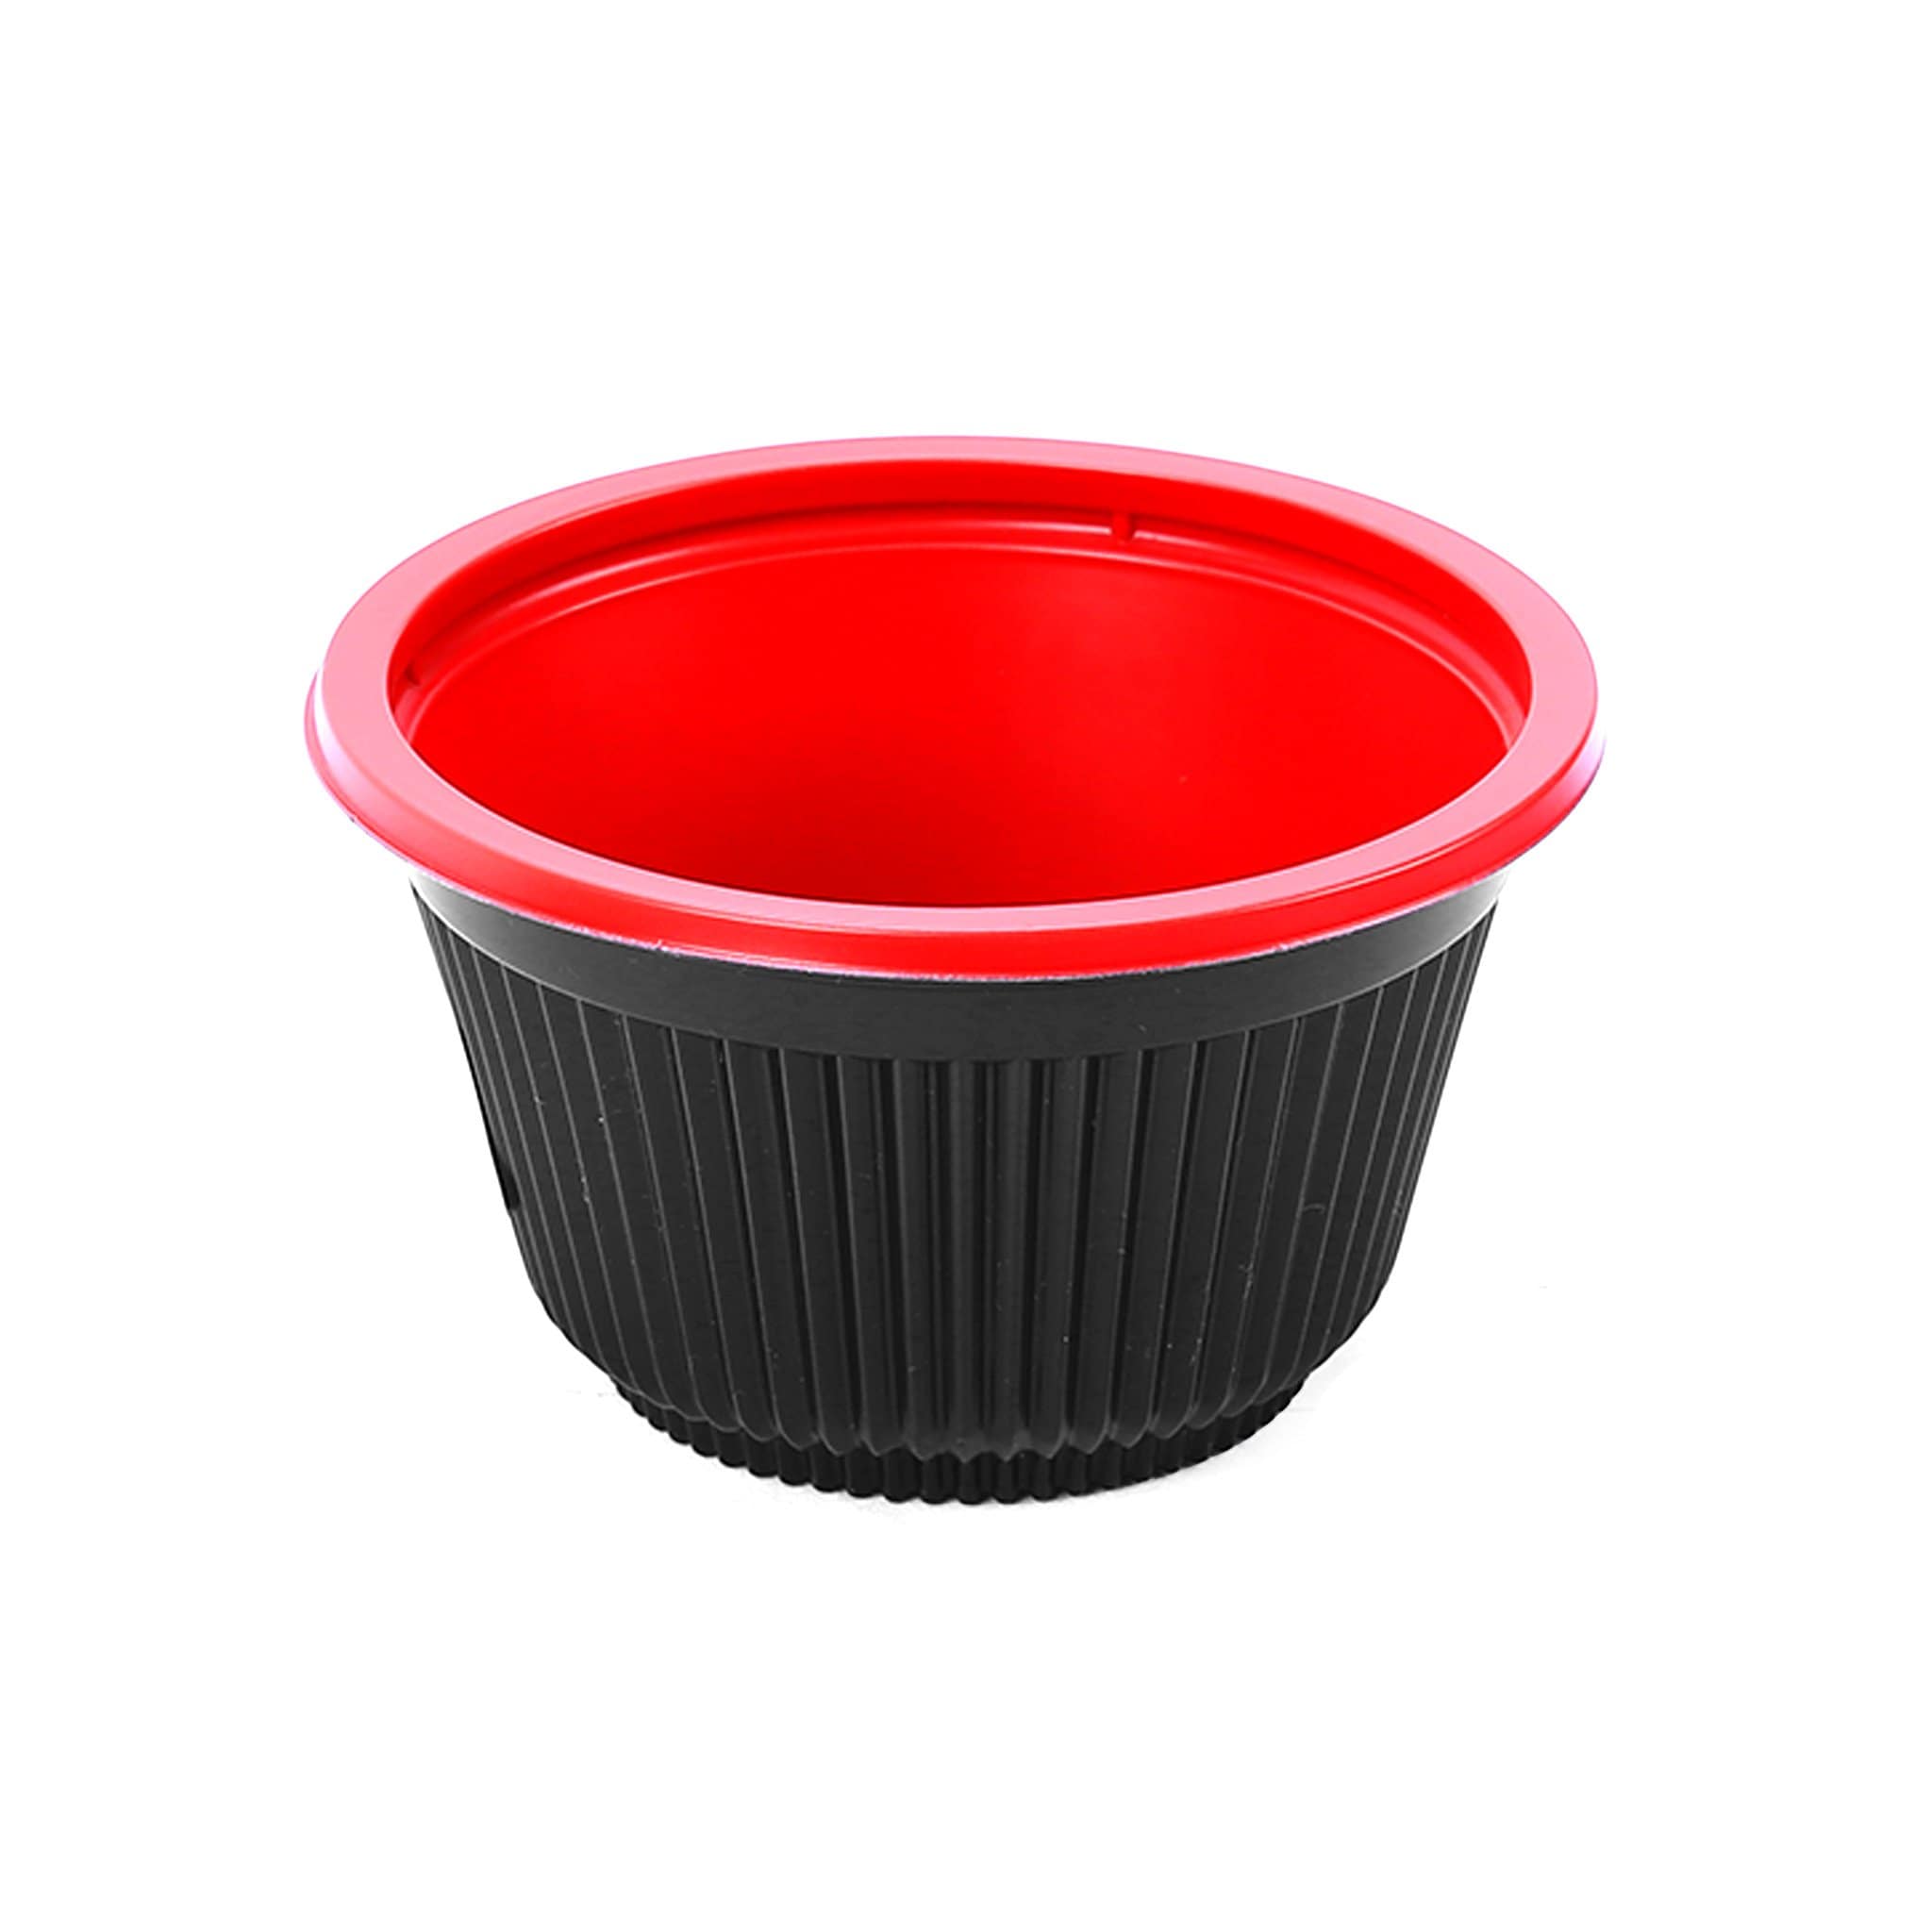 Hotpack | Red & Black Soup Bowl 450 cc with Lids | 200 Pieces - Hotpack Global